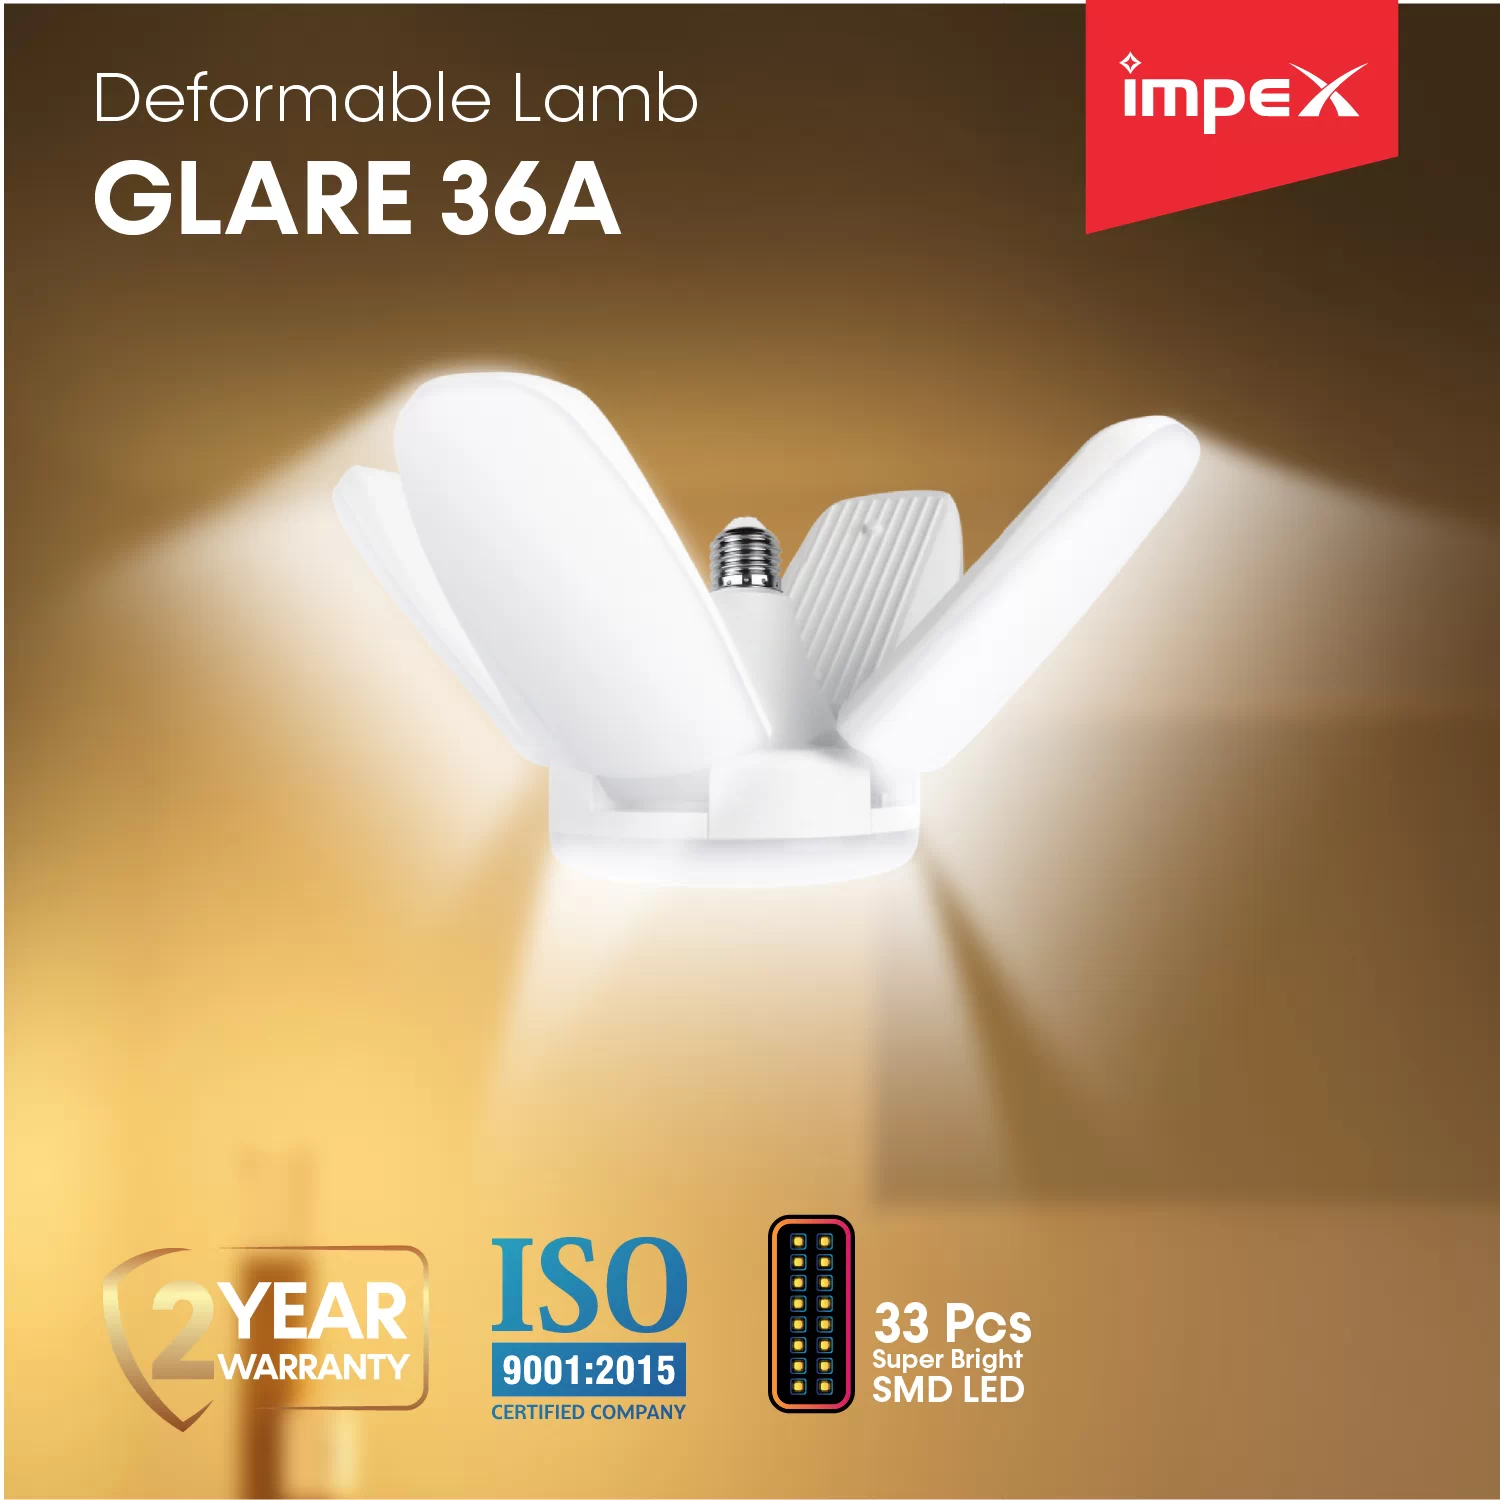 Deformable Lamp | Glare 36A